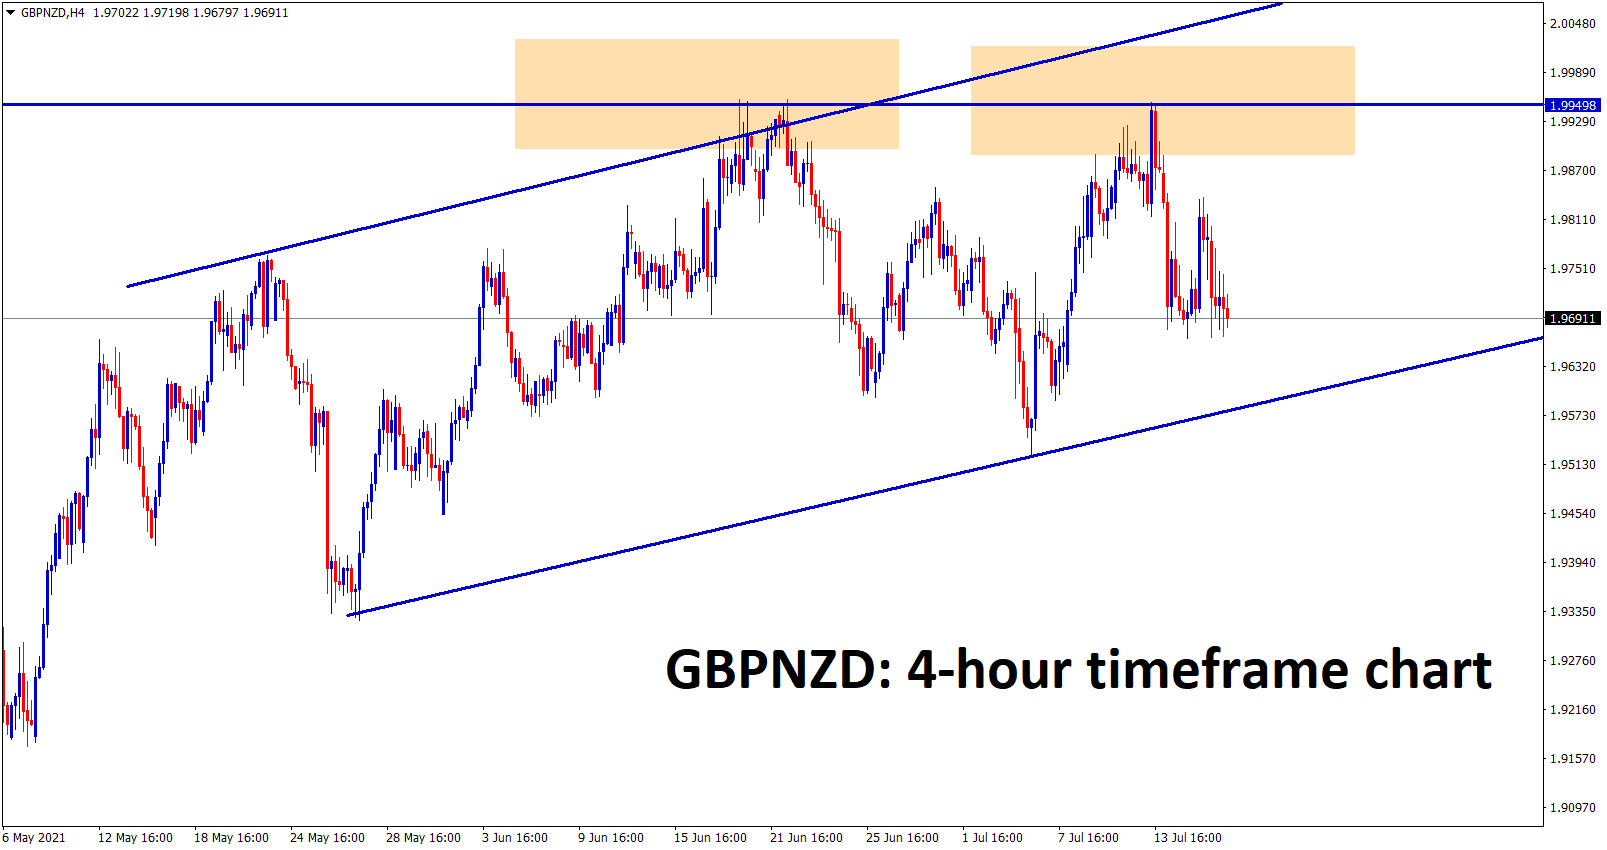 GBPNZD is moving in an Ascending channel the major resistance is highlighted if ti breaks the top it will surge more.